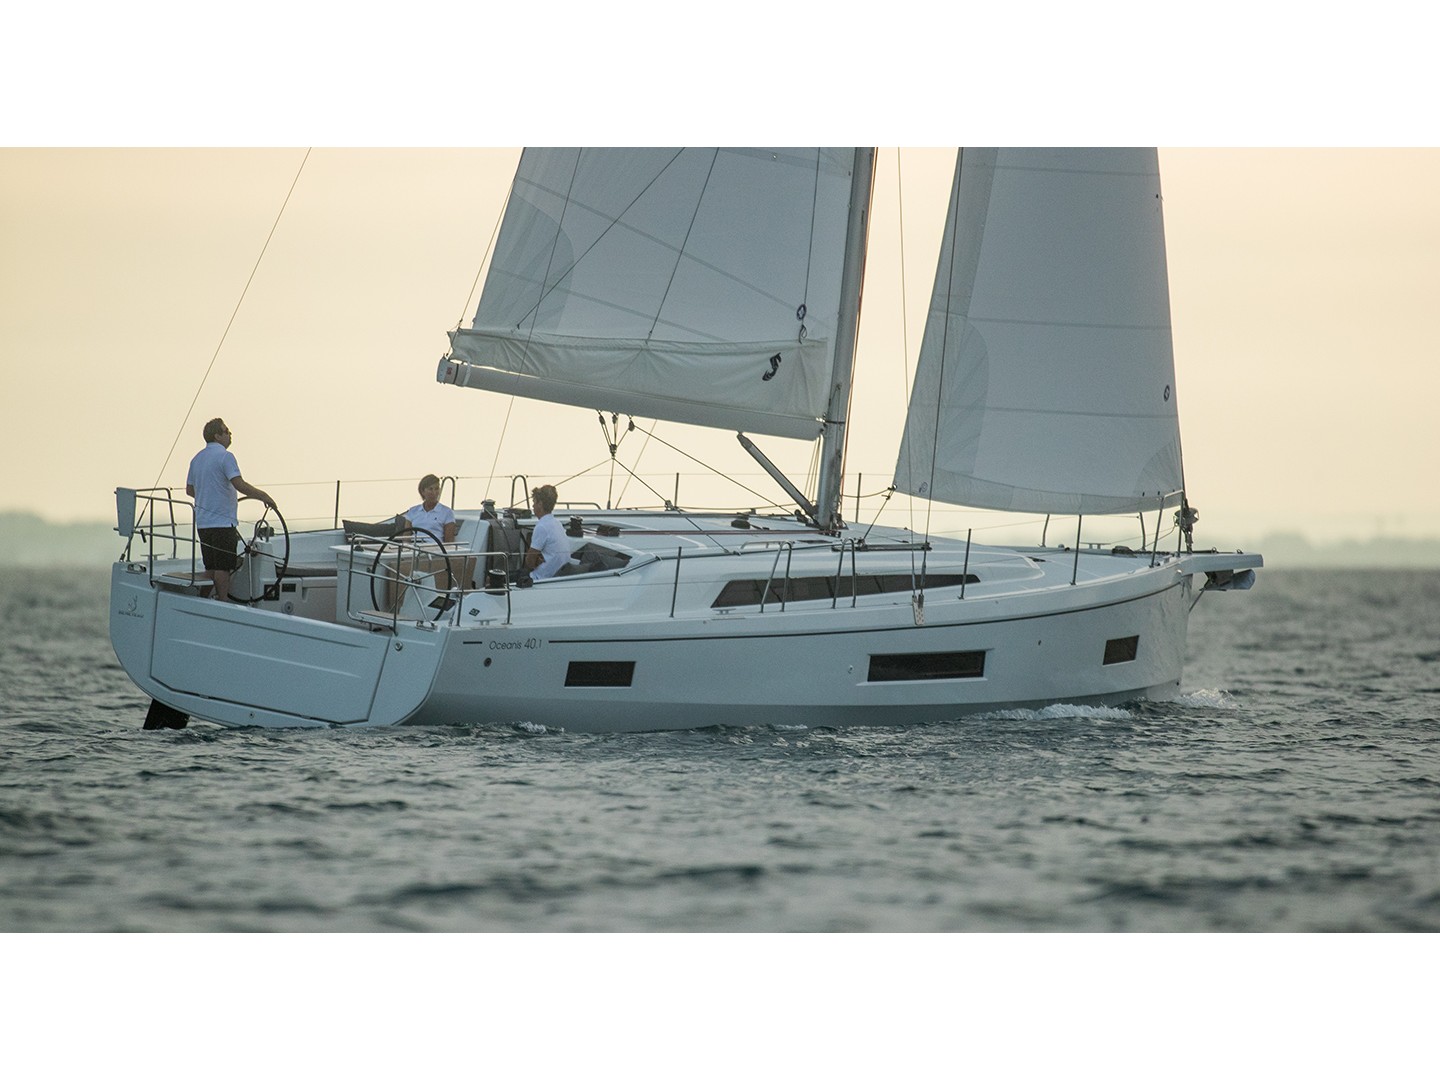 Oceanis 40.1 - Yacht Charter San Vincenzo & Boat hire in Italy San Vincenzo Marina di San Vincenzo 1